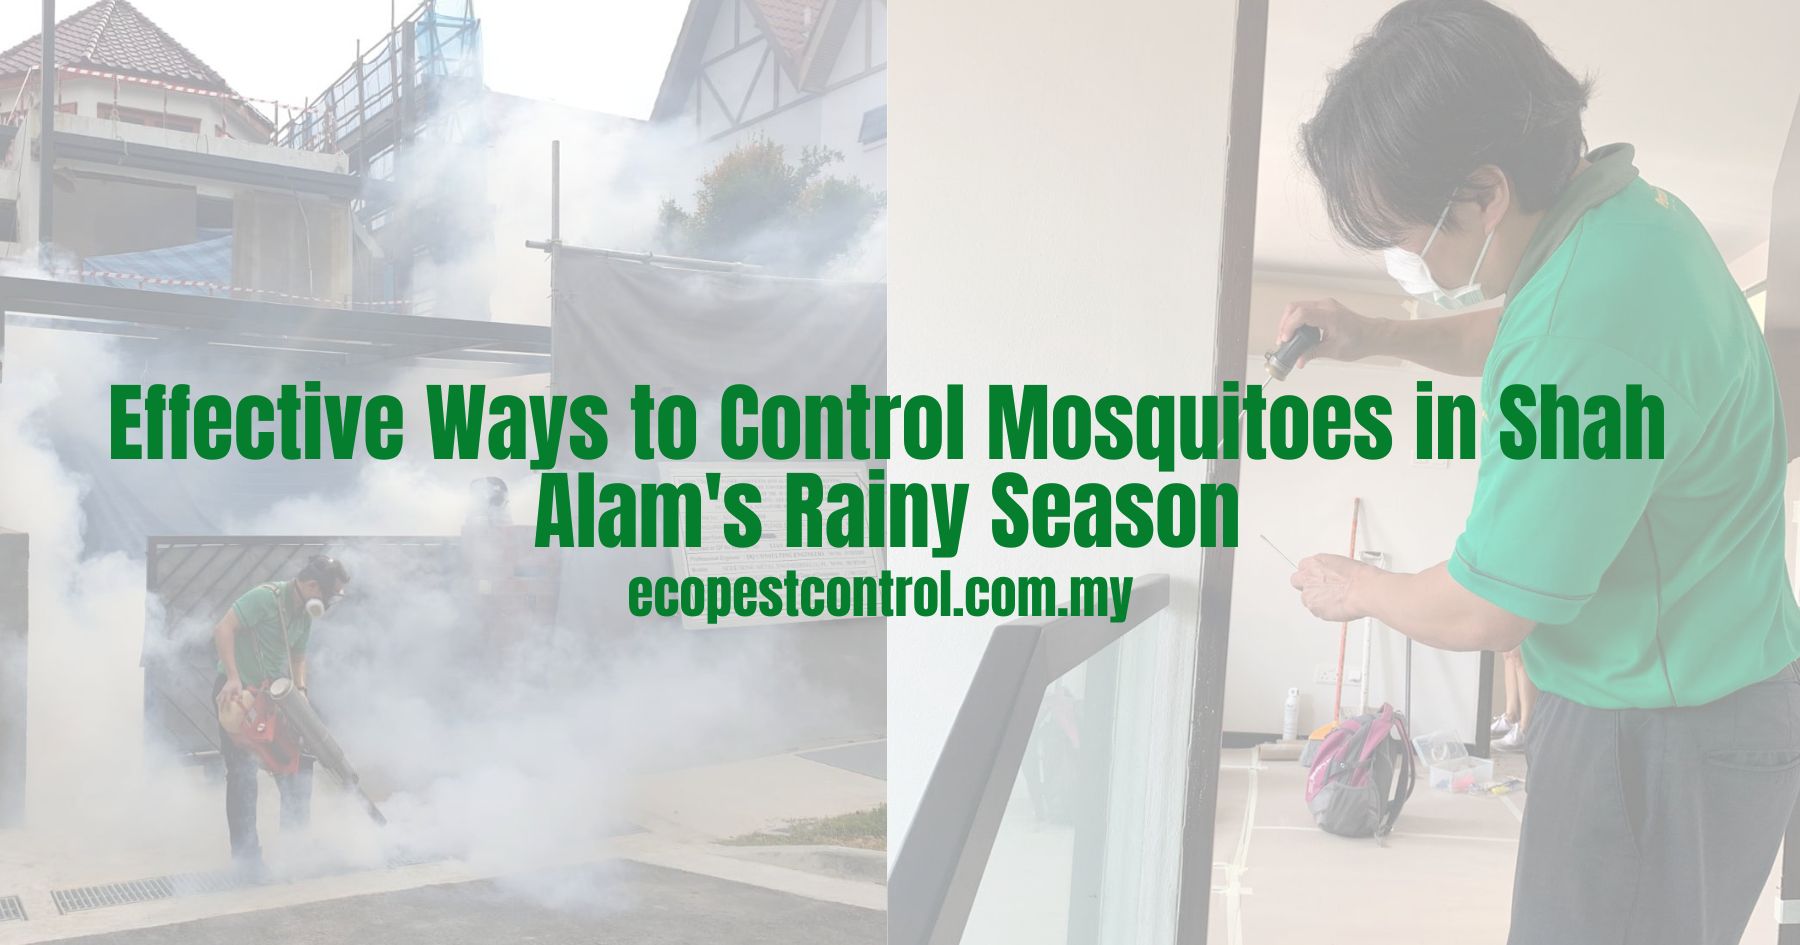 Effective Ways to Control Mosquitoes in Shah Alam's Rainy Season